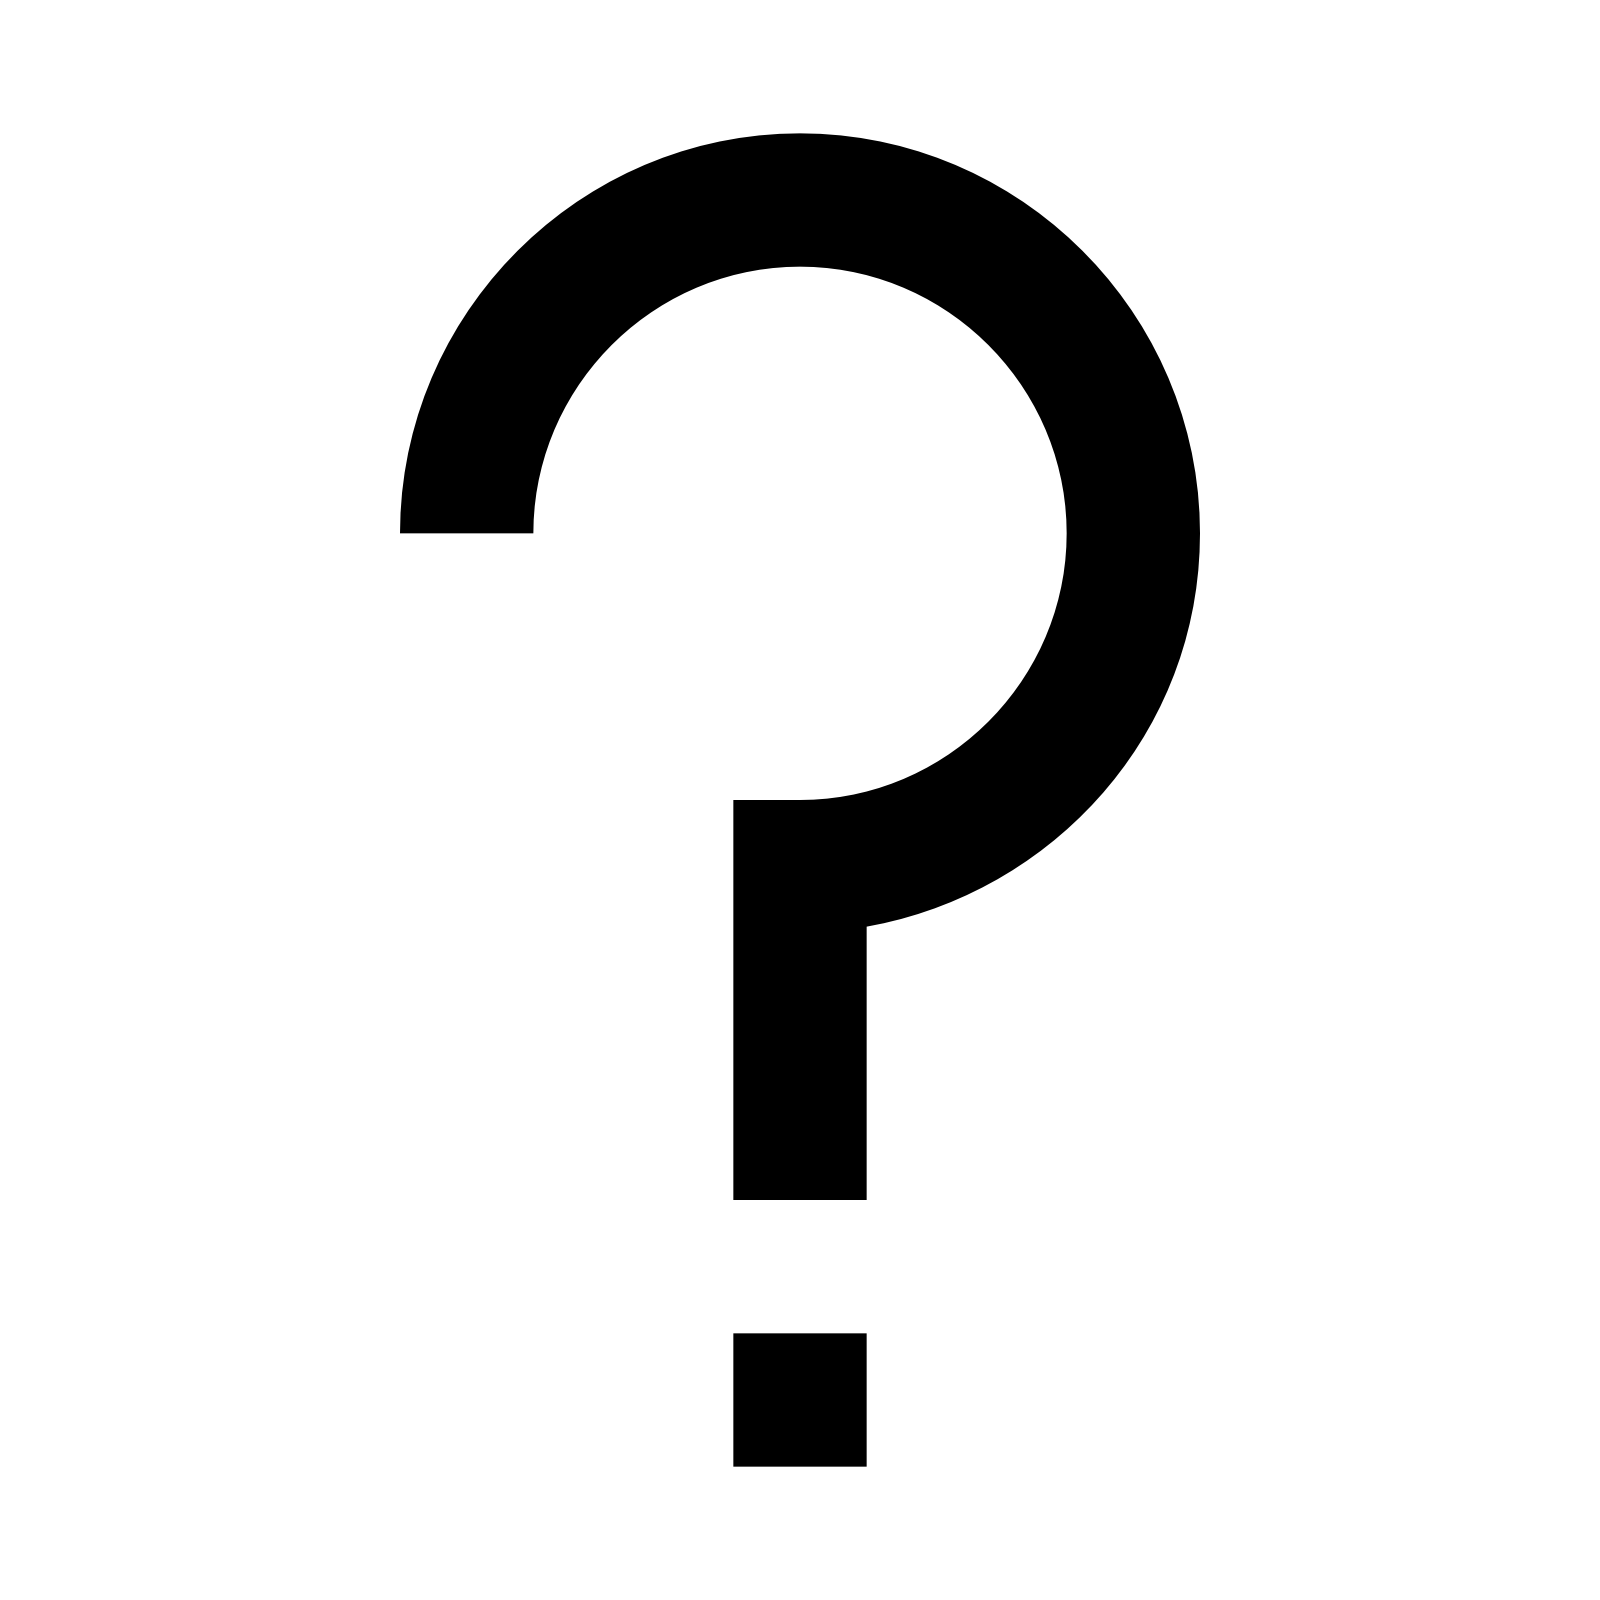 Images of Question Mark | 1600x1600